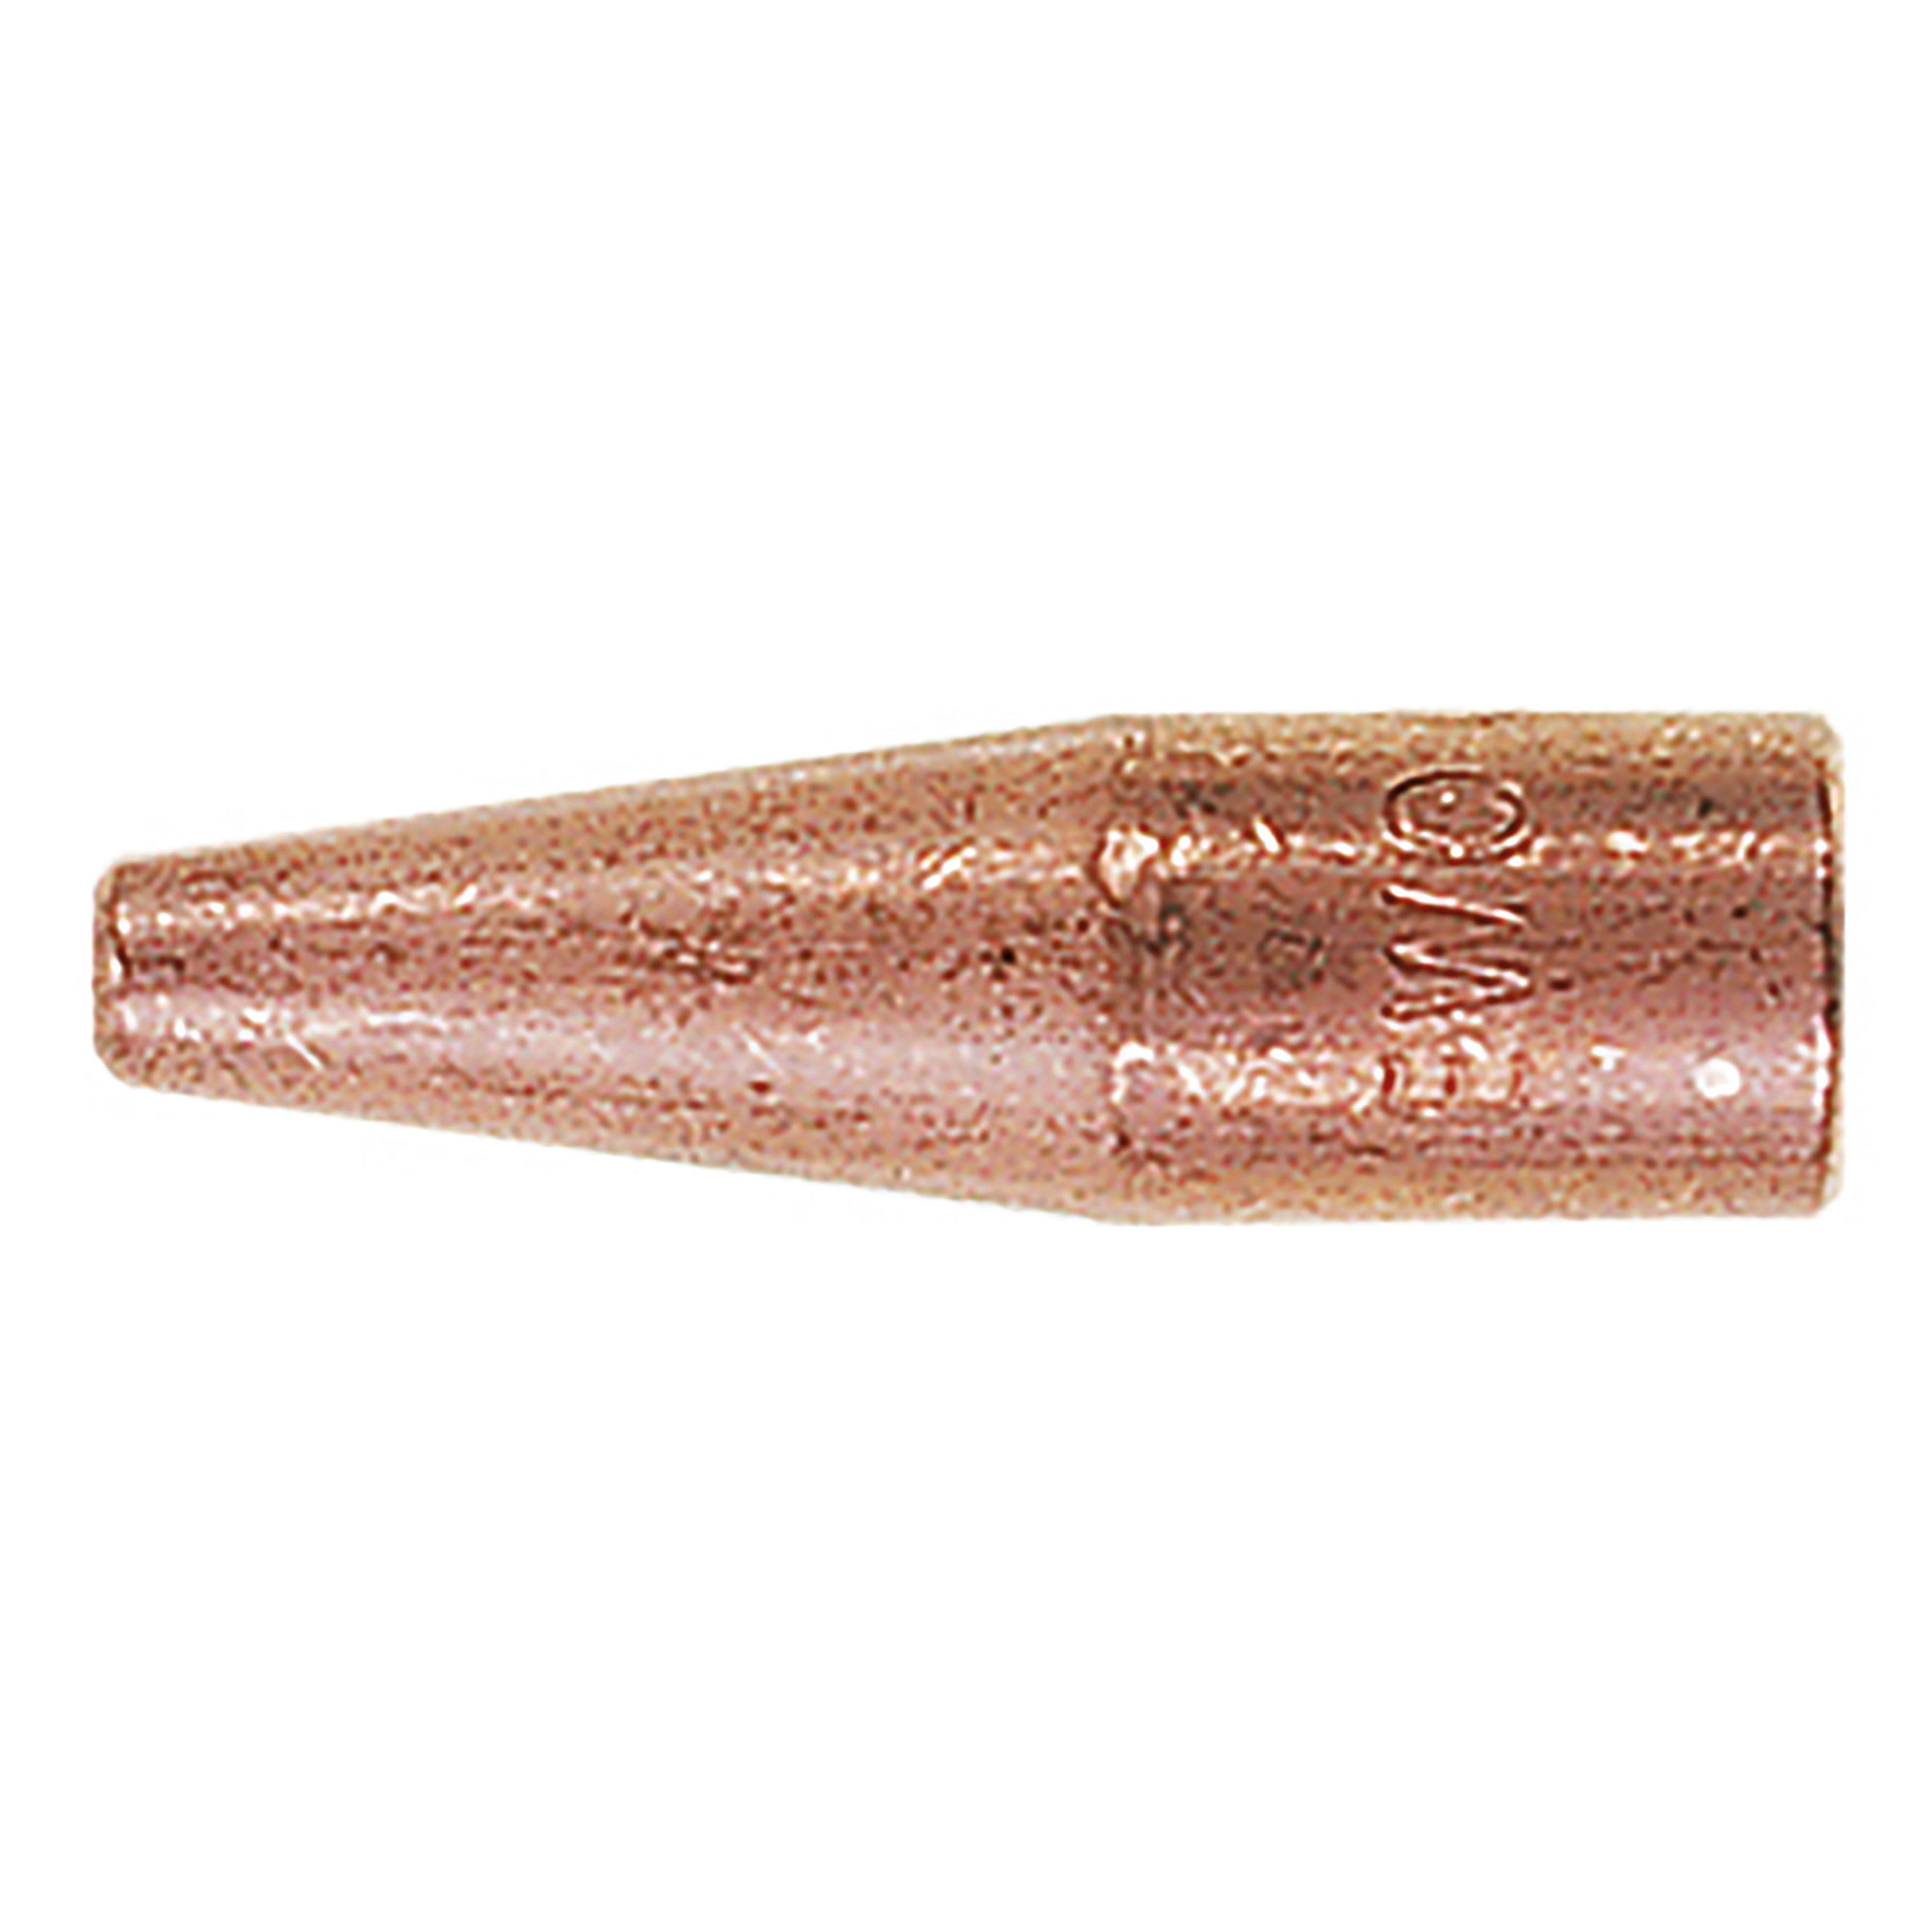 Warming nozzle, size: 3, nominal range: 2 – 4 mm, thread: 8 × 28 threads, for inserts with 17 mm shank